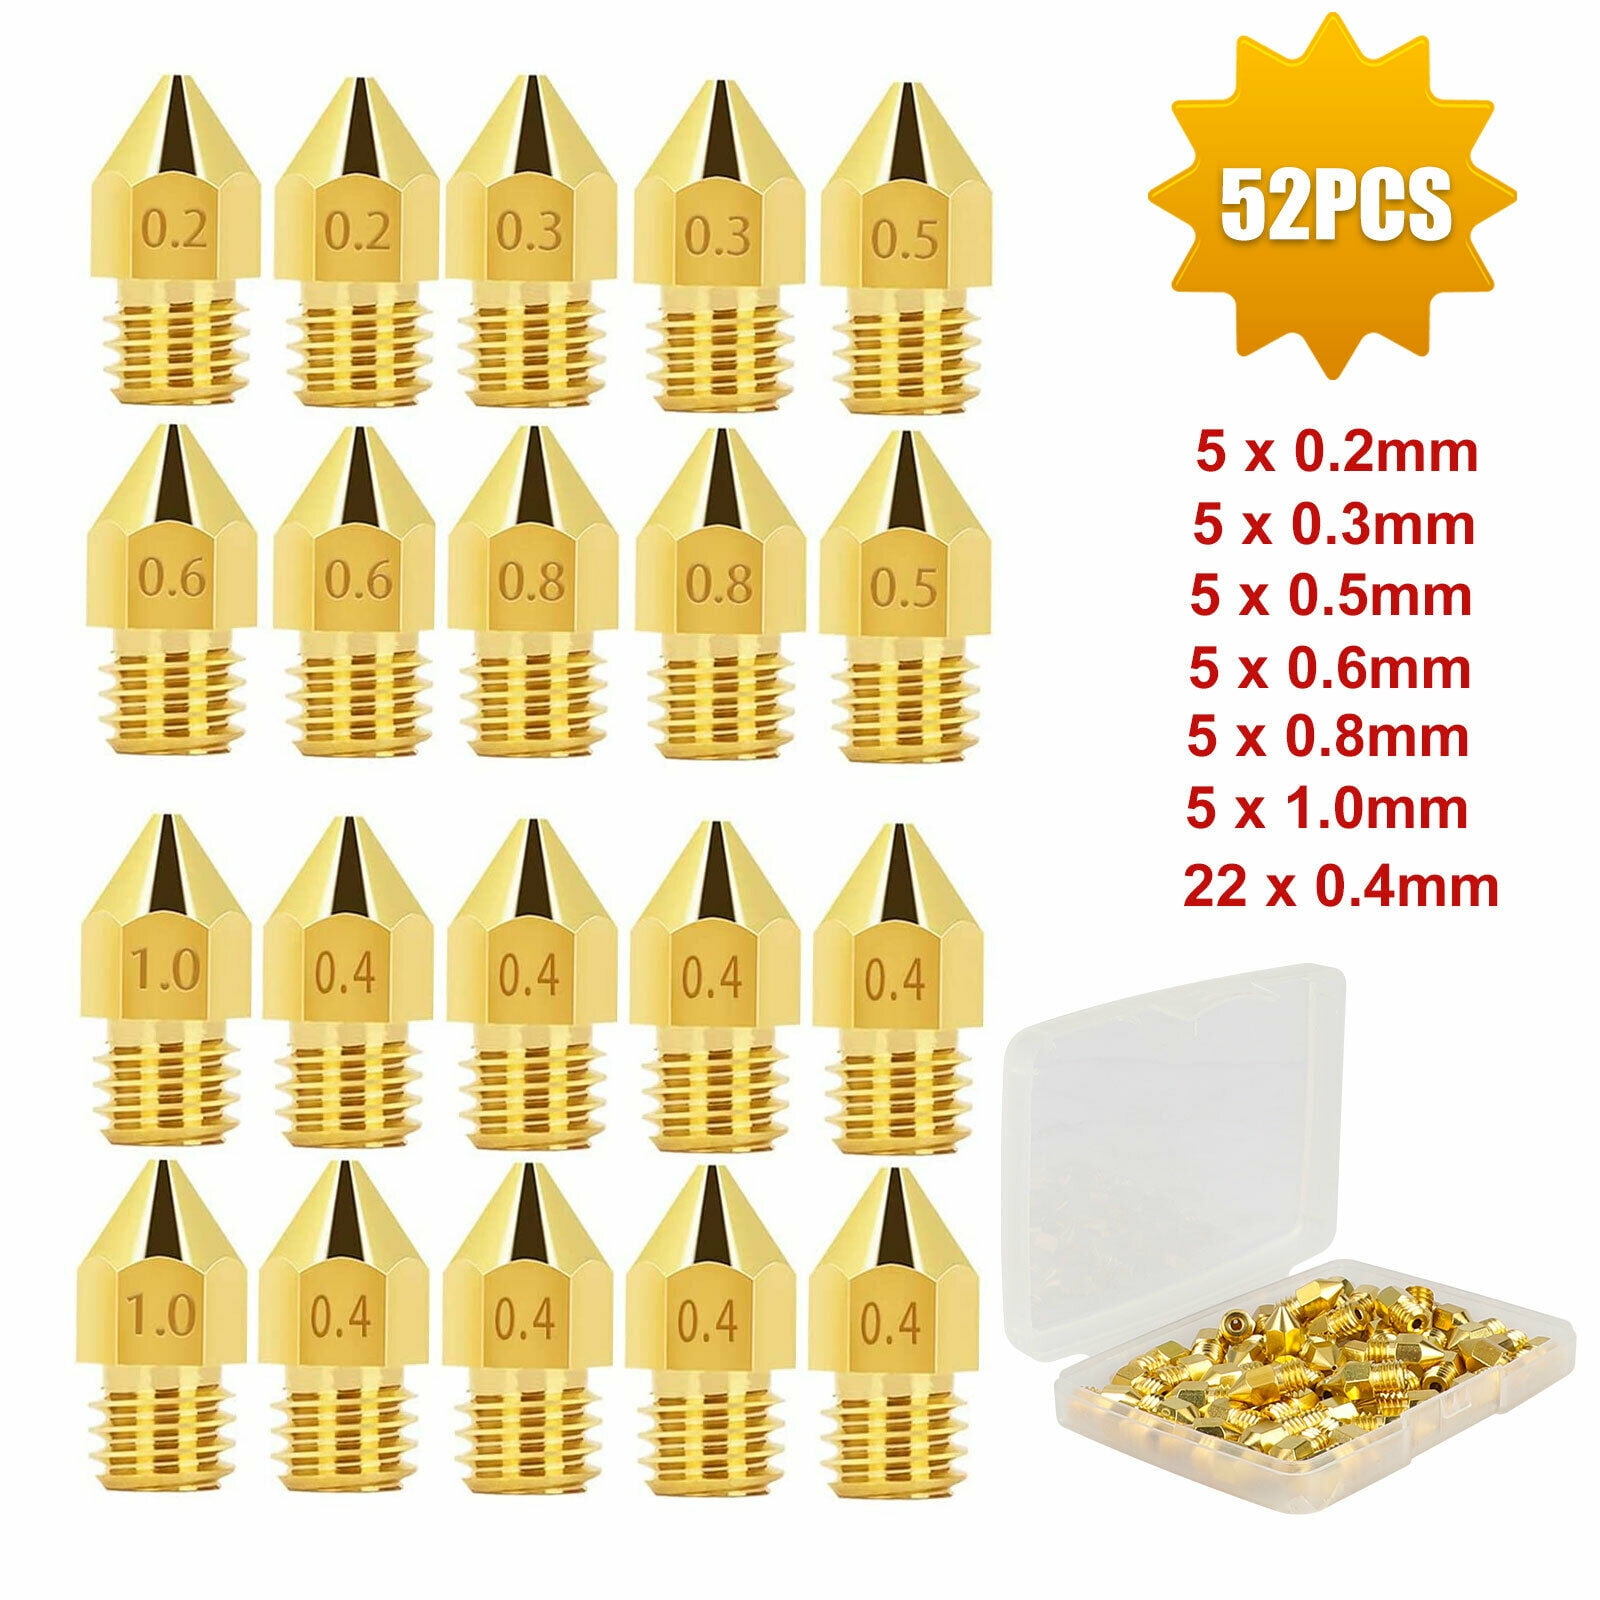 3D Printer 0.2-1.0mm Brass Mk8 Extruder Nozzle Print Heads For 1.75/3mm Makerbot 